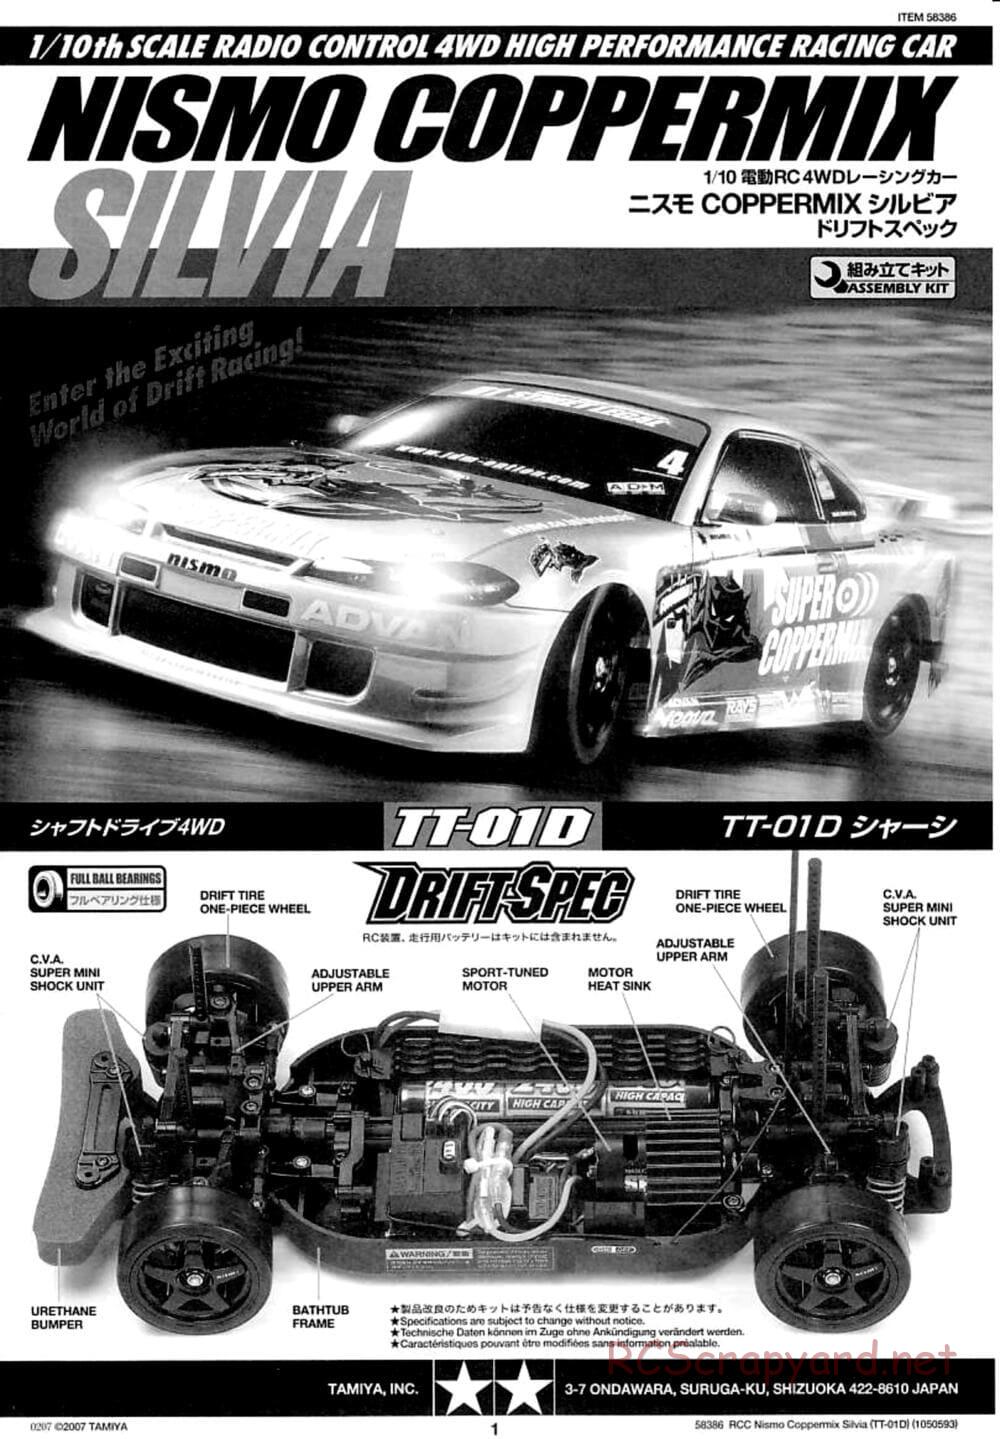 Tamiya - Nismo Coppermix Silvia Drift Spec - TT-01D Chassis - Manual - Page 1